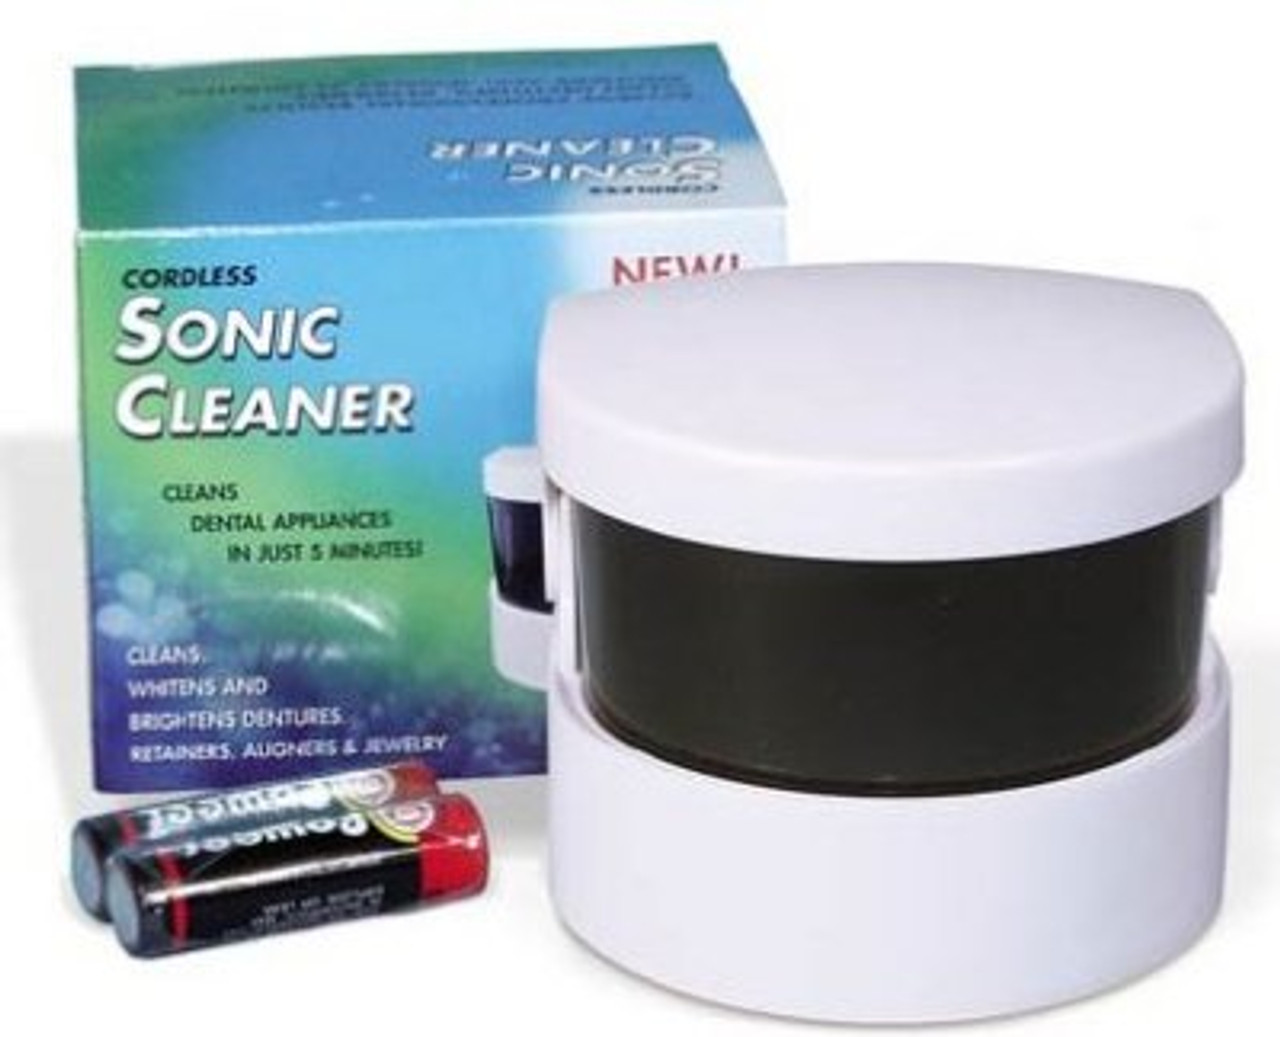 Sonic Scrubber Power Cleaning System Review